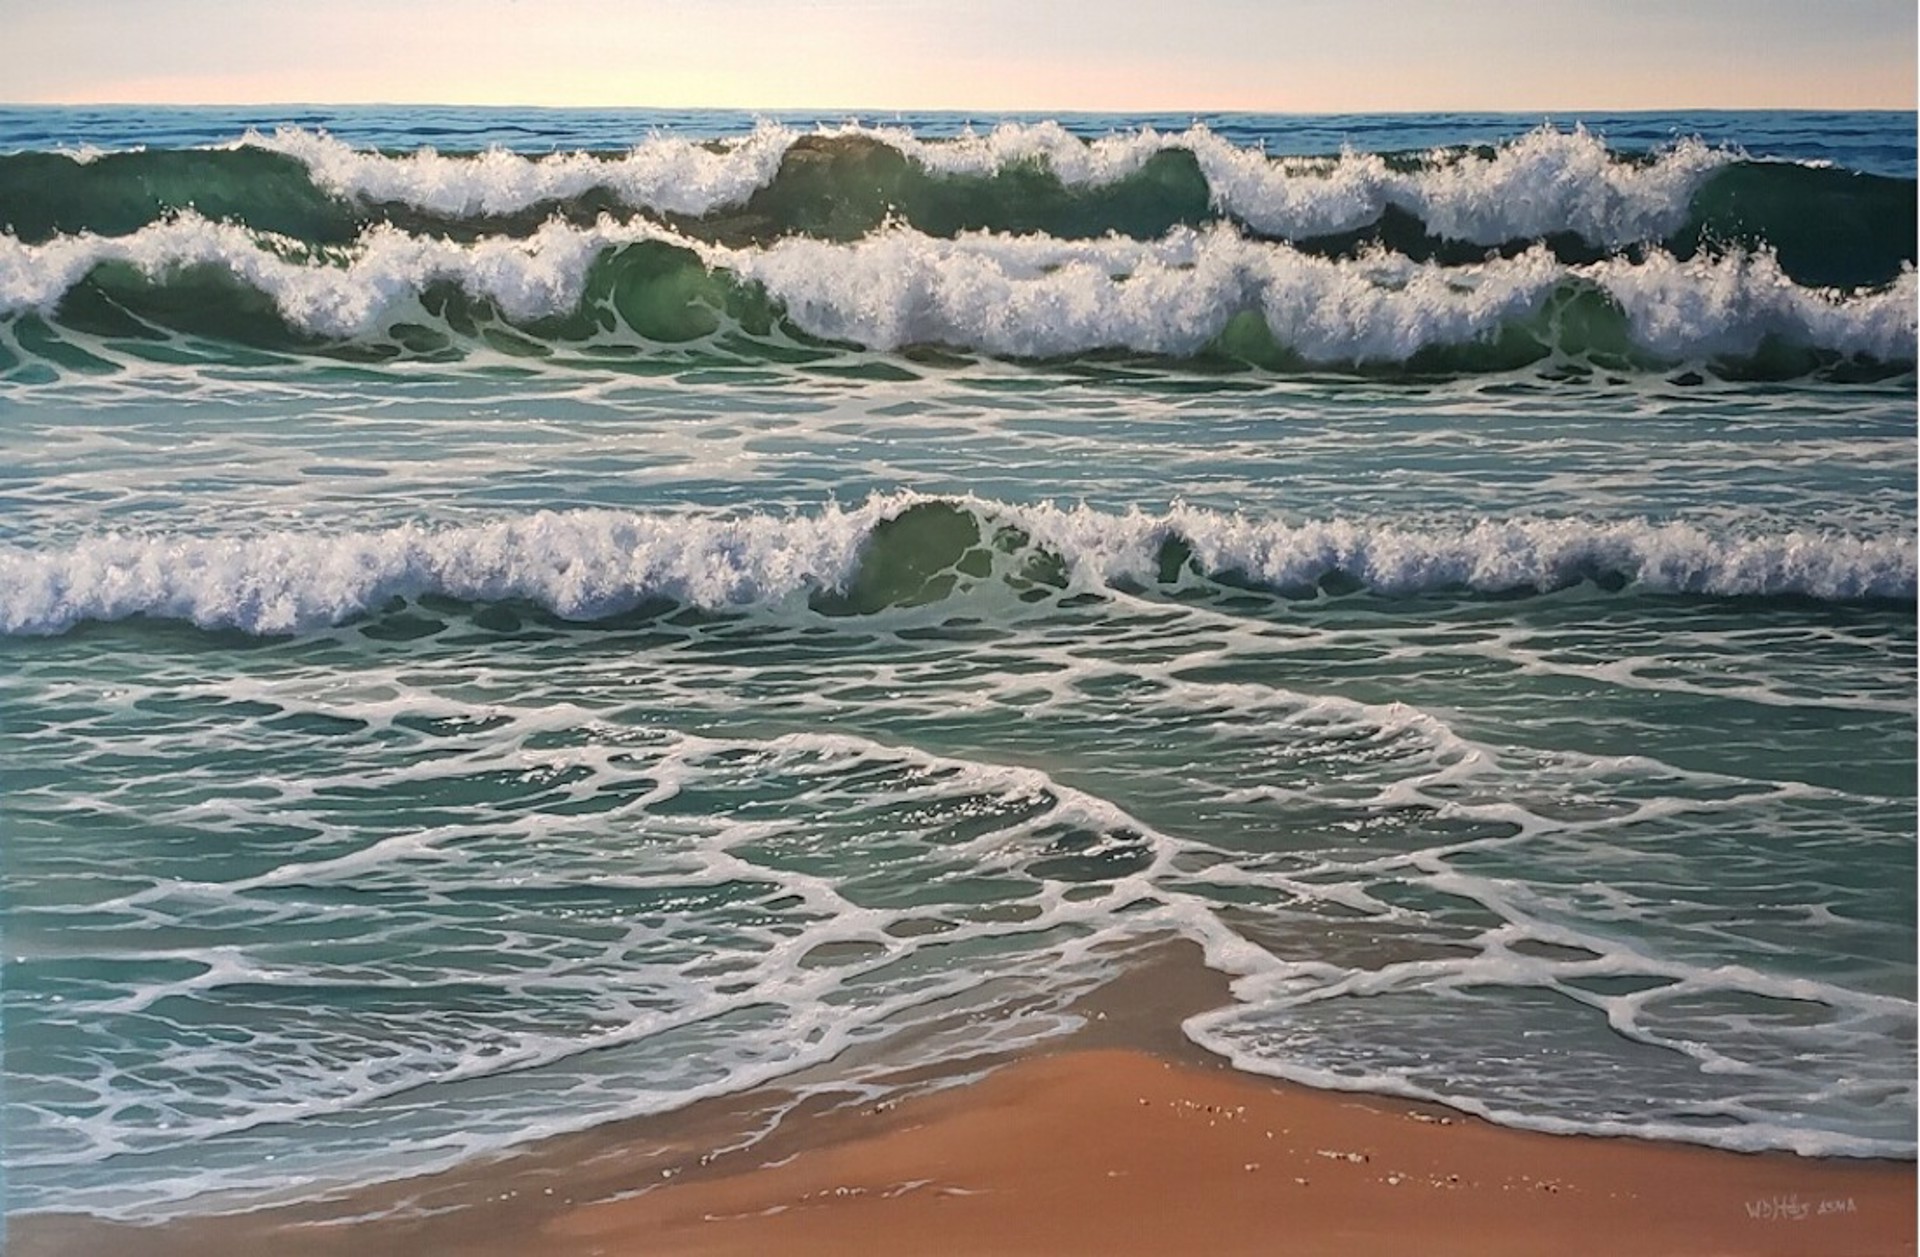 Gently Lapping Waves by William D. Hobbs